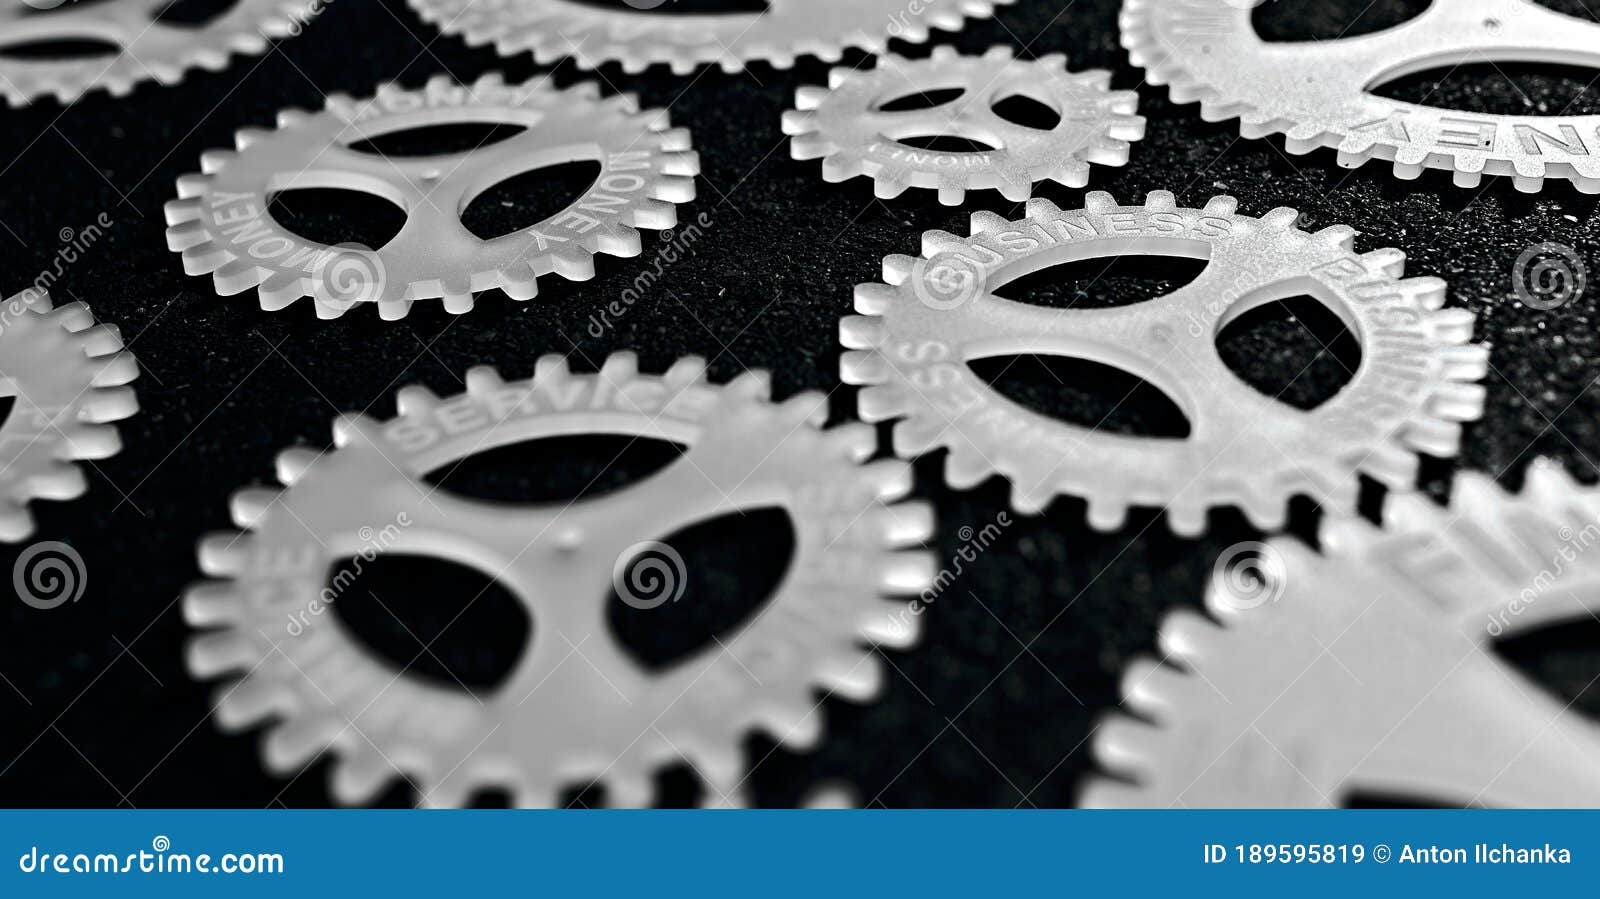 several gears with different inscription. topic of finance. in focus business service money